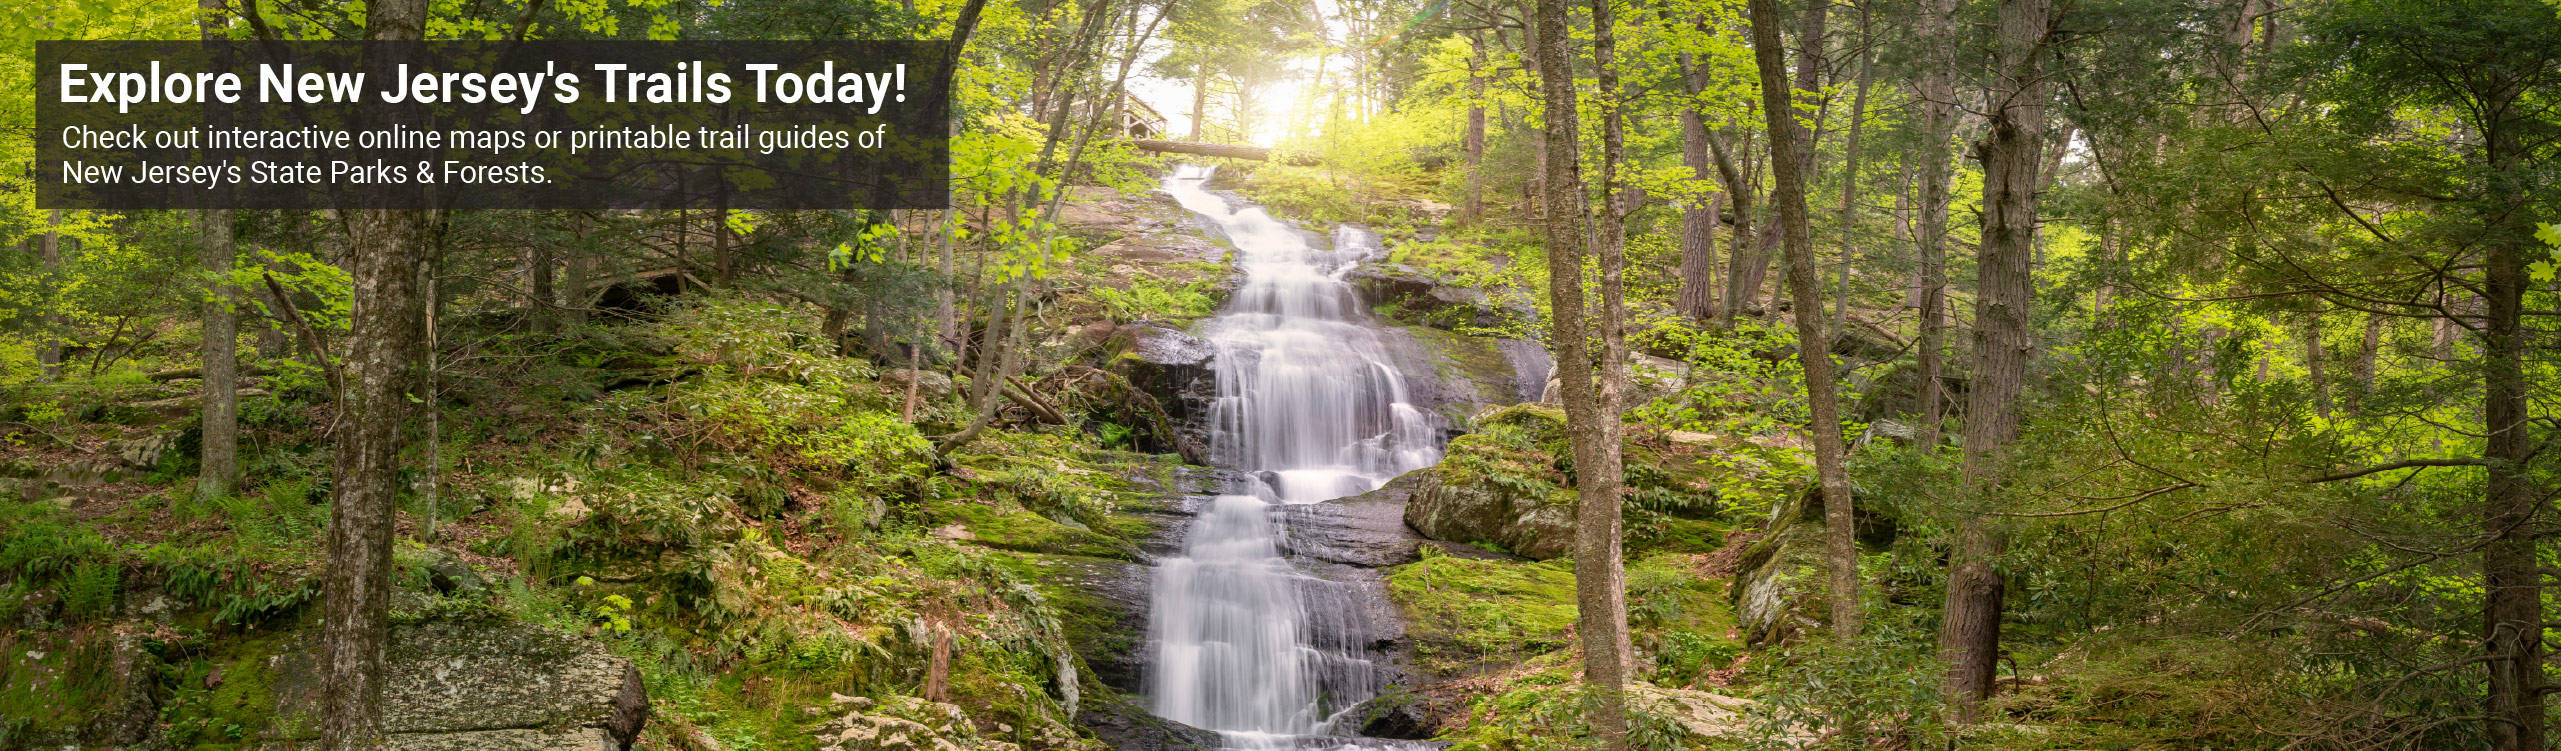 photo of waterfall in the woods - Check out interactive online maps or printable trail guides of New Jersey's State Parks & Forests.